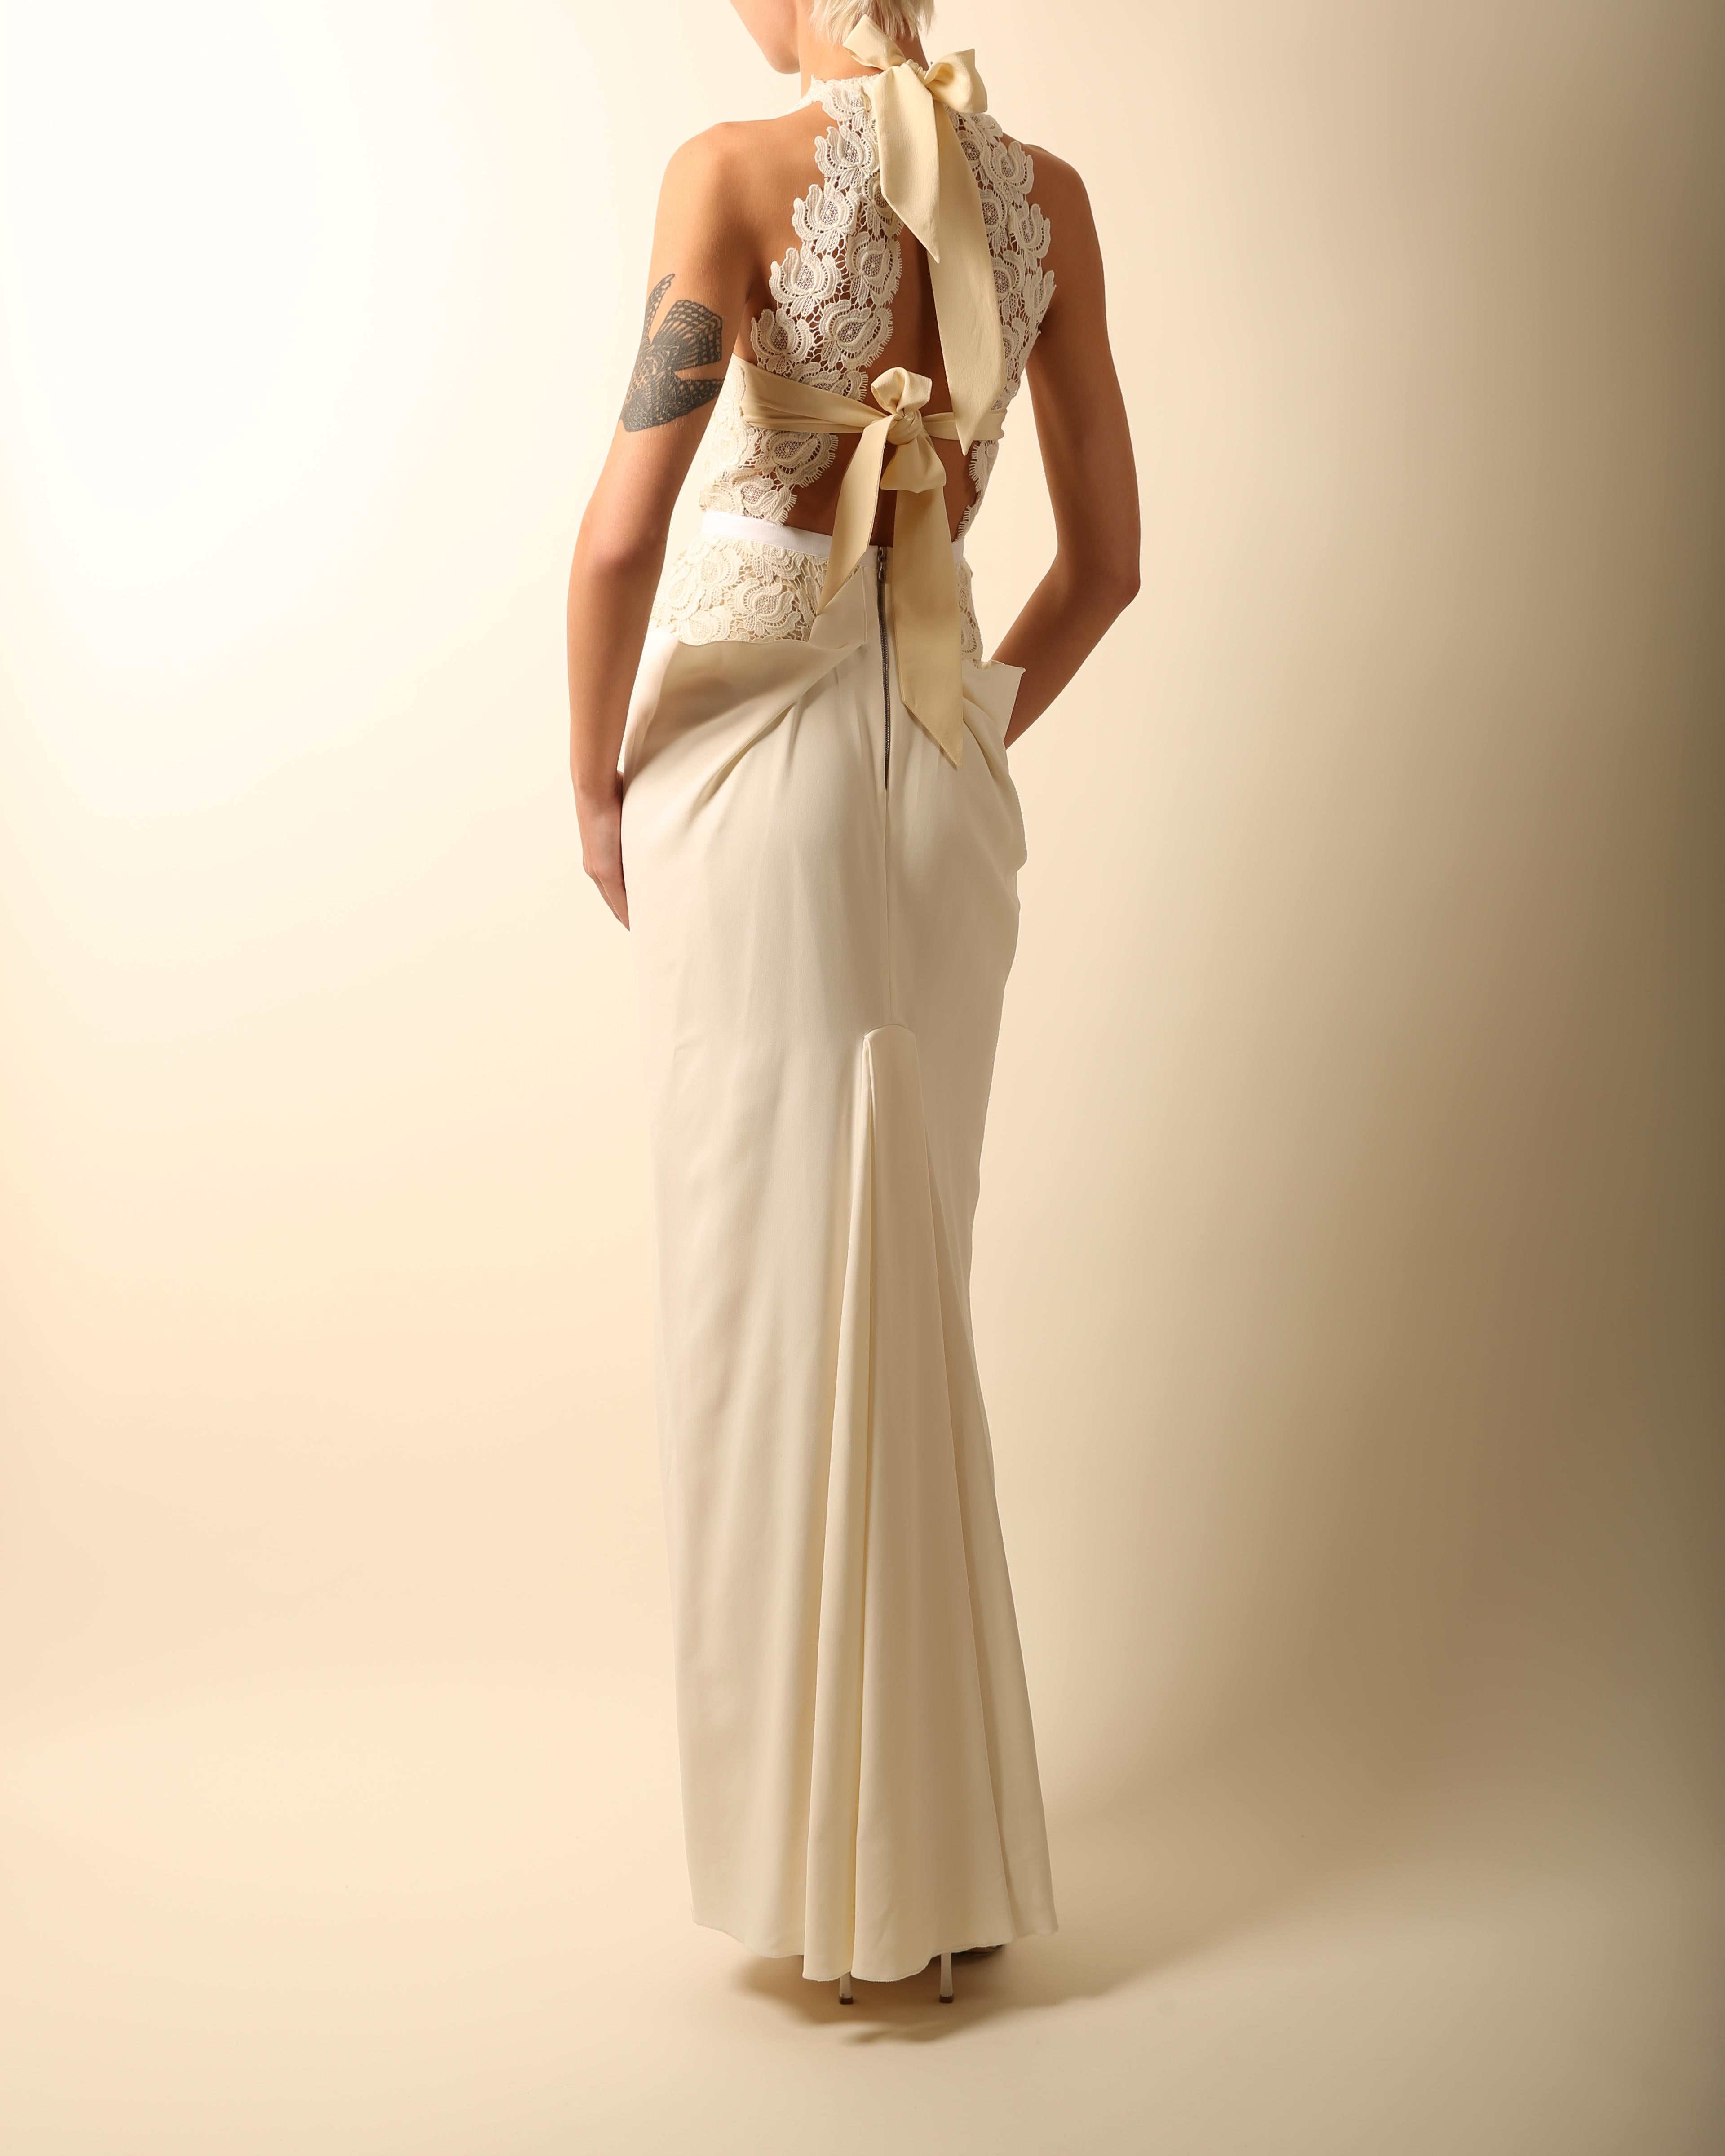 Roland Mouret ivory cream lace halter ribbon tie cut out backless wedding dress 2